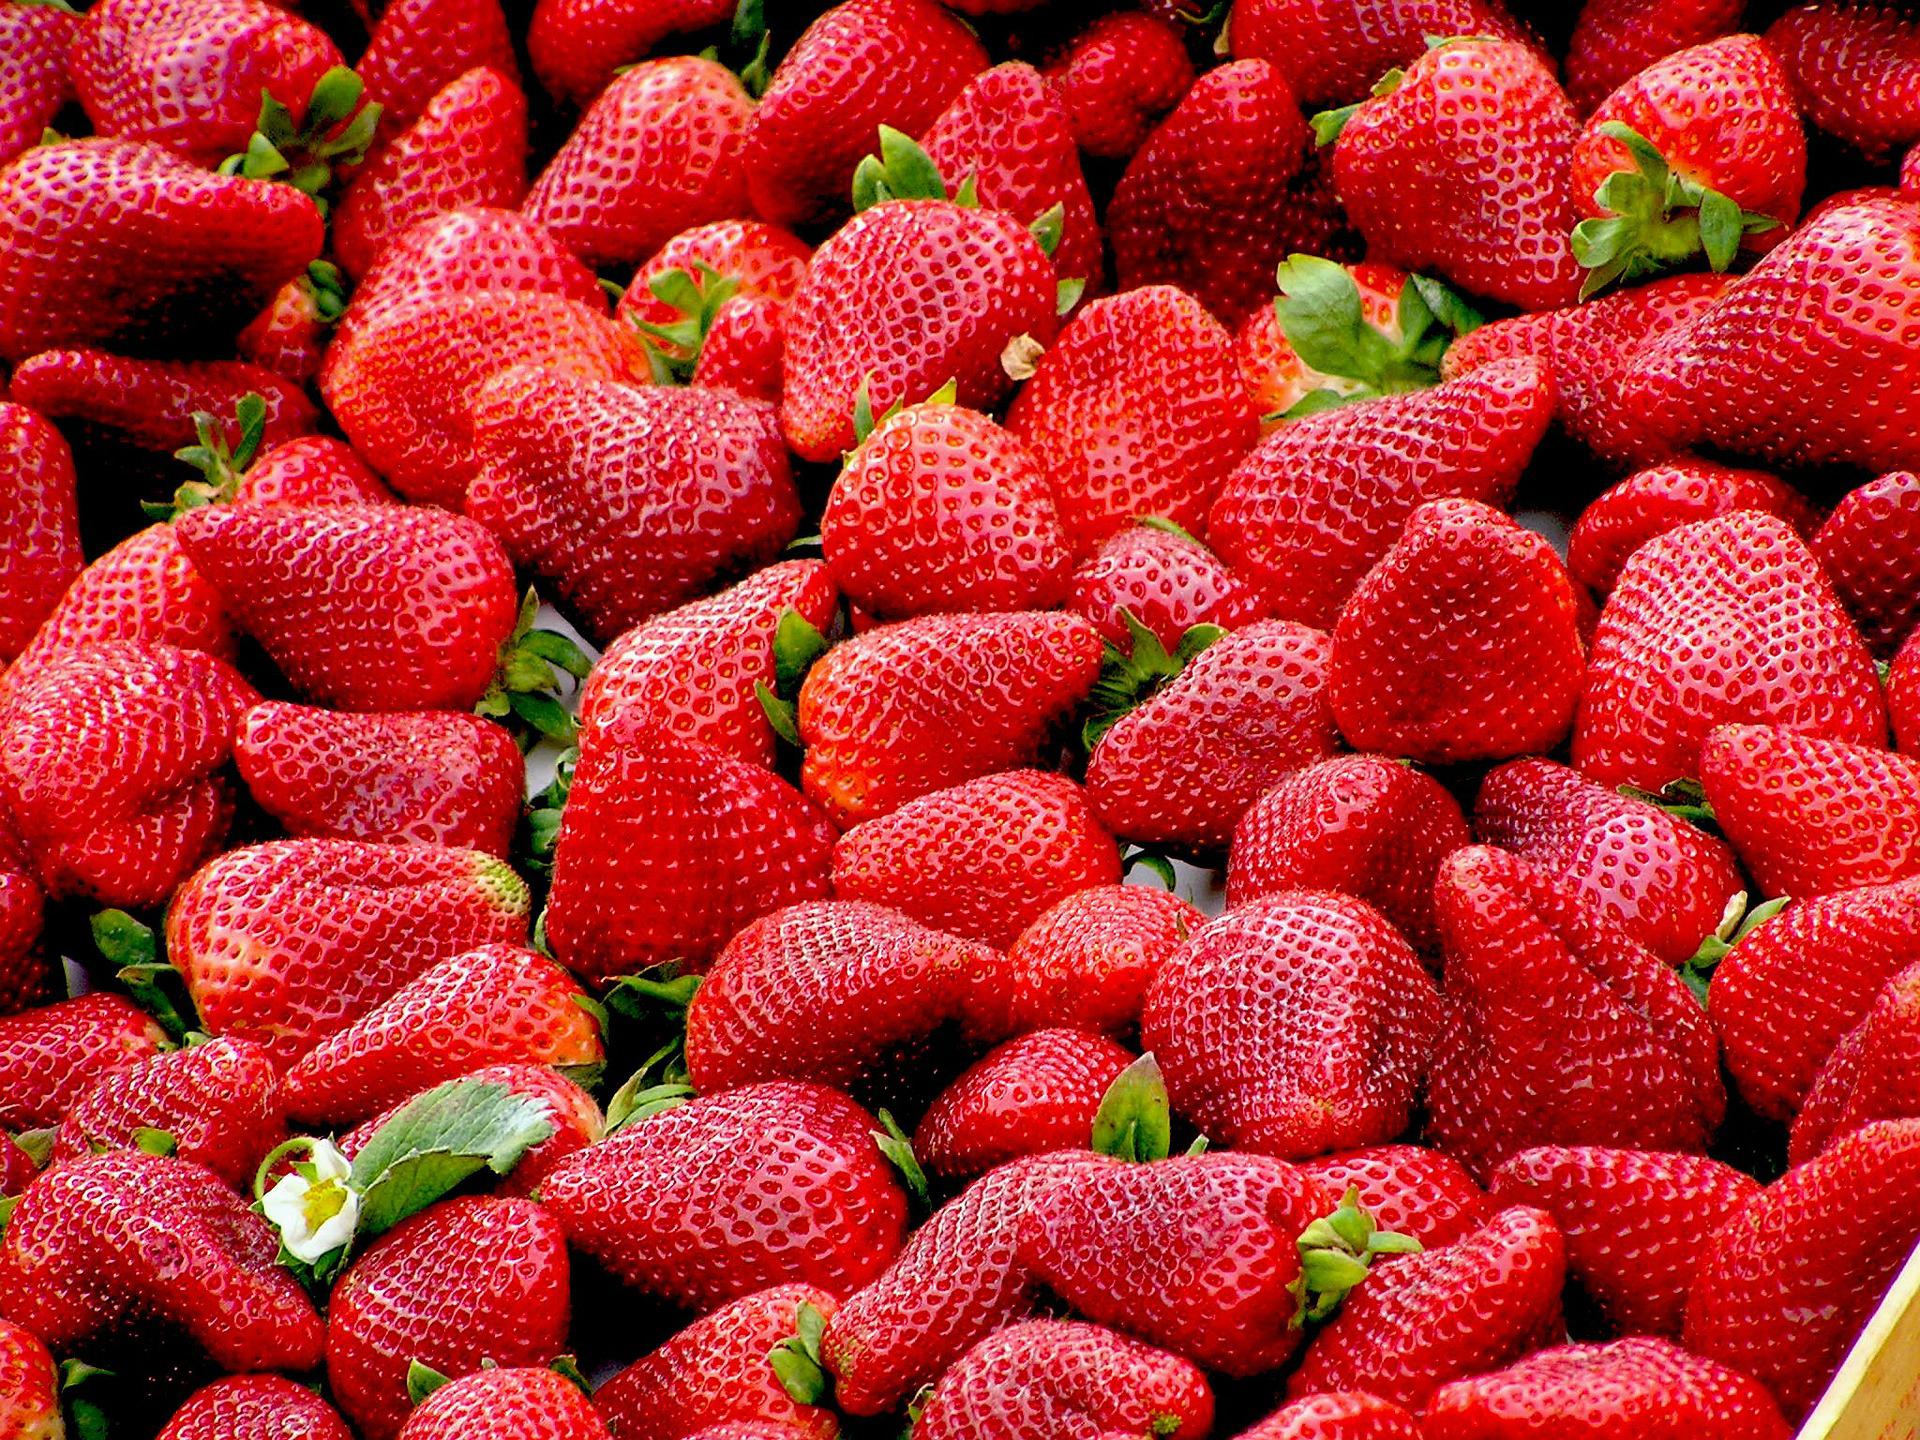 FDA Warns Against Consumption of Organic Strawberries After Outbreak of Hep A 